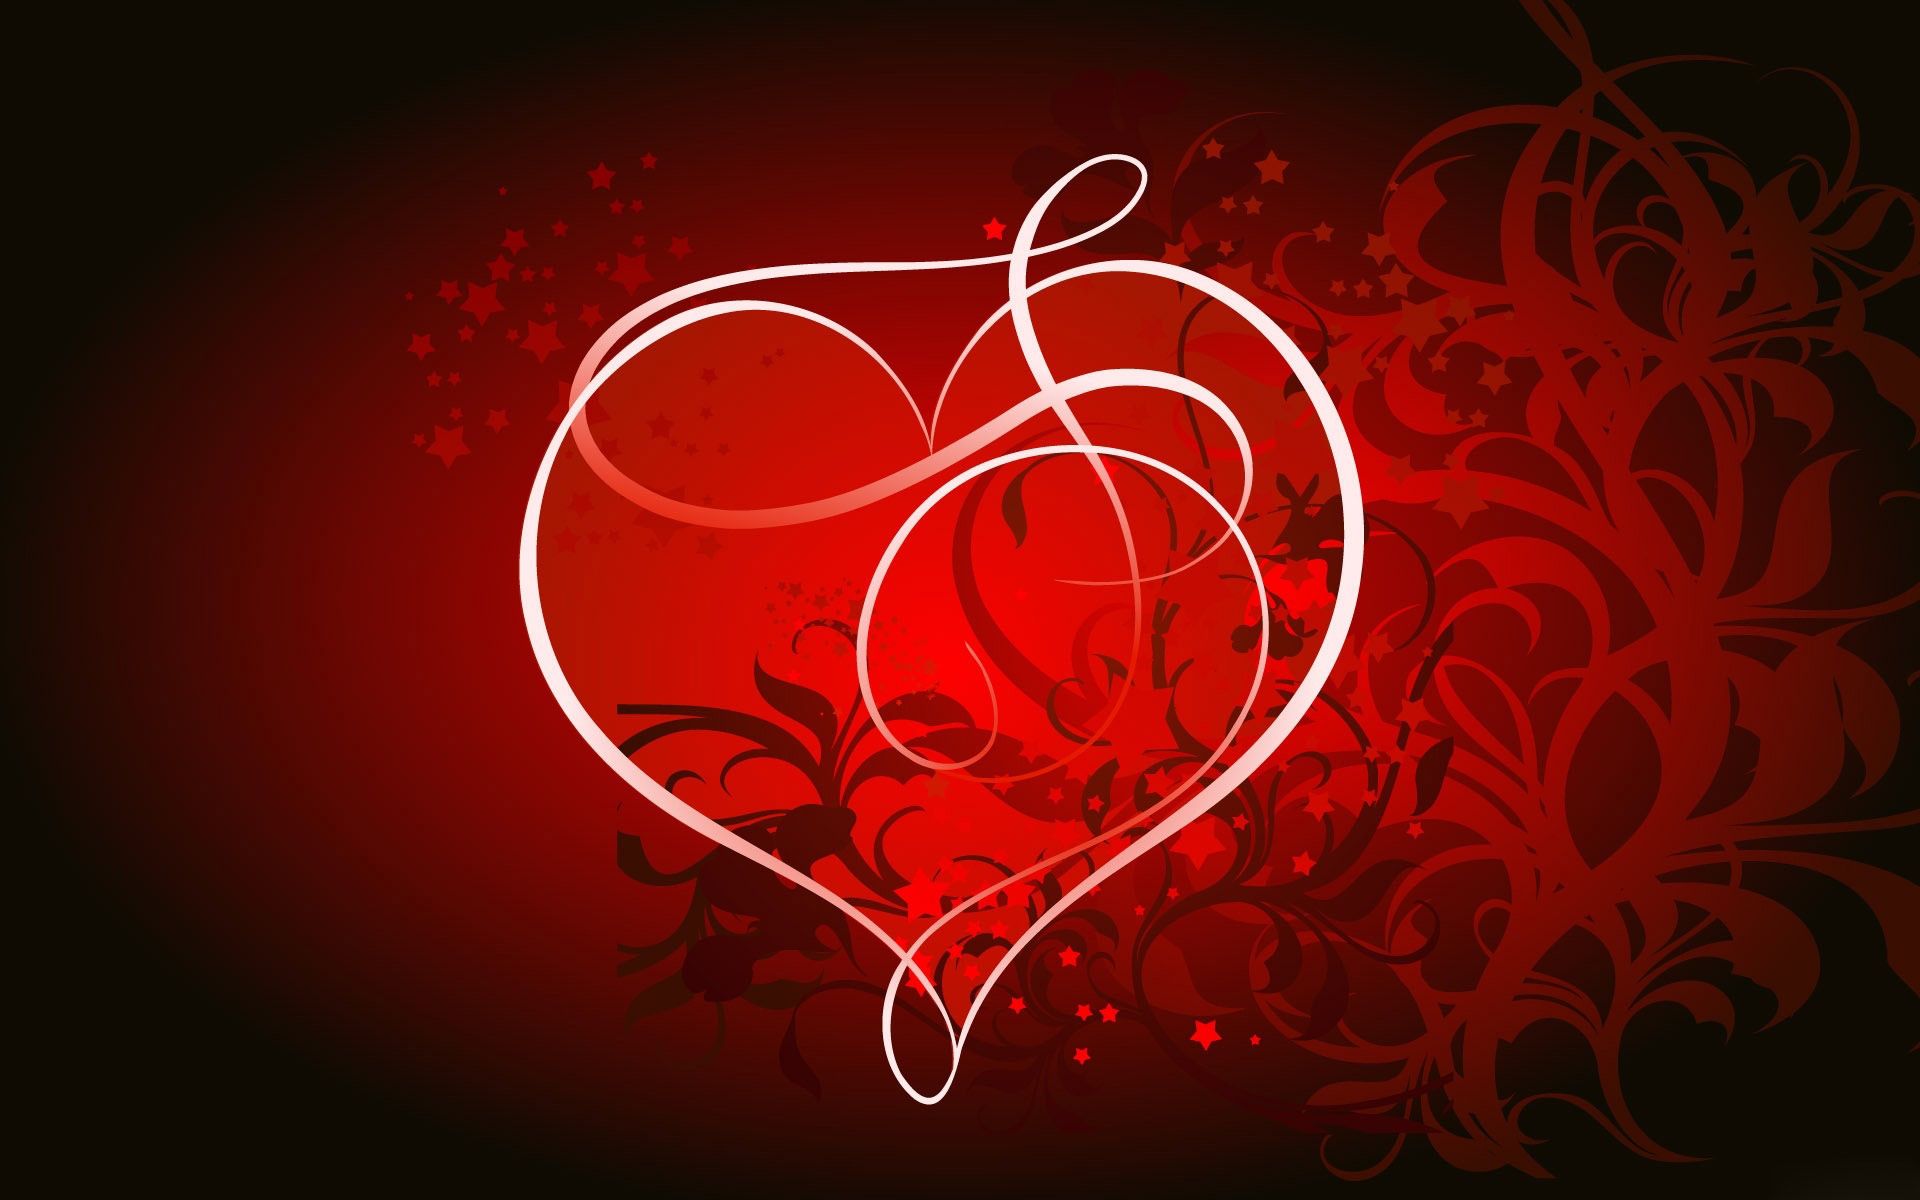 10 Best] Valentine's Day PC Wallpapers to Make the Mood Romantic ...